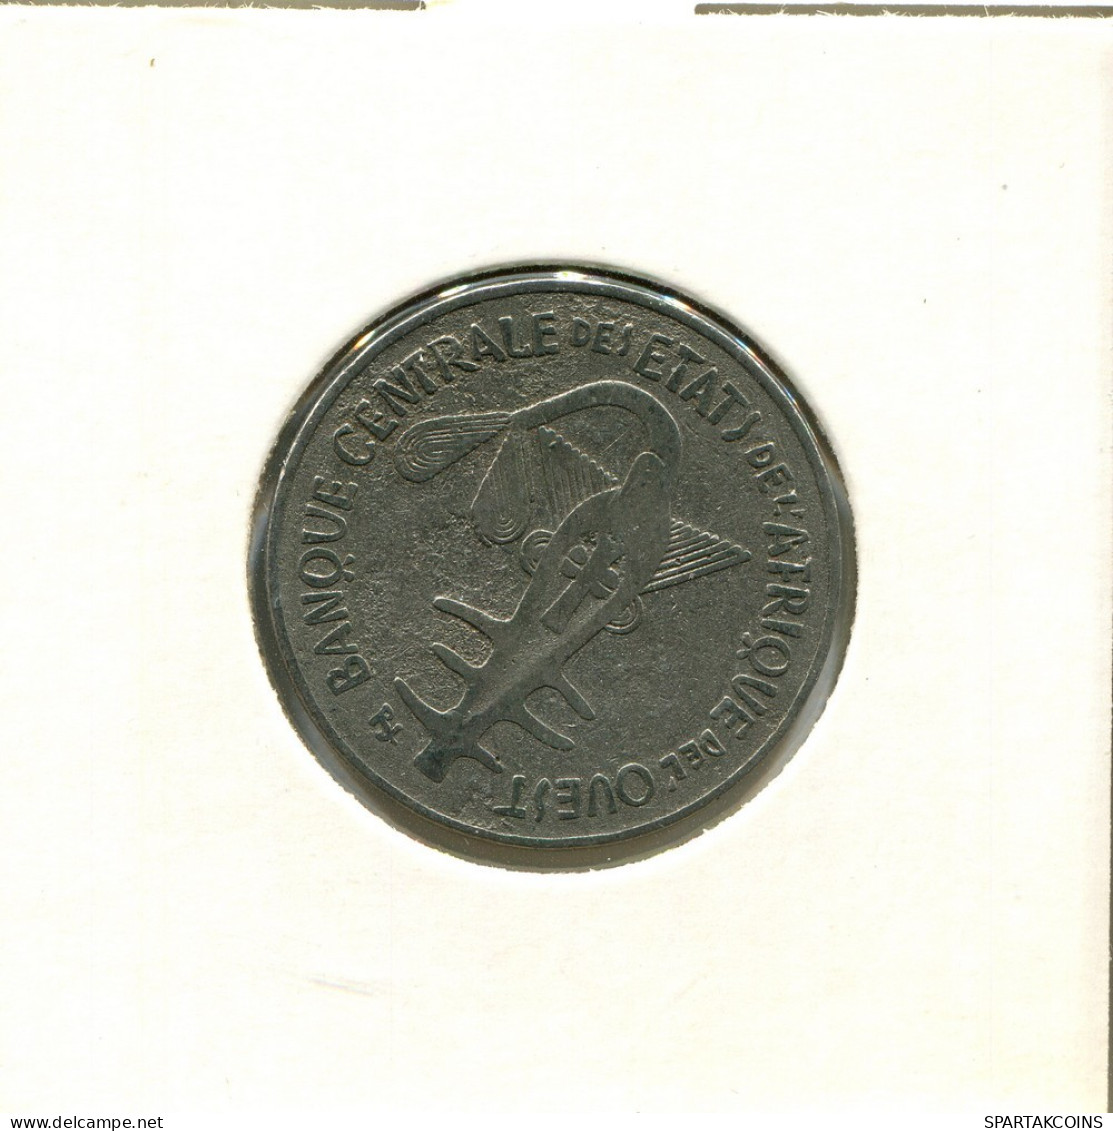 100 FRANCS CFA 1981 Western African States (BCEAO) Coin #AT054.U.A - Andere - Afrika